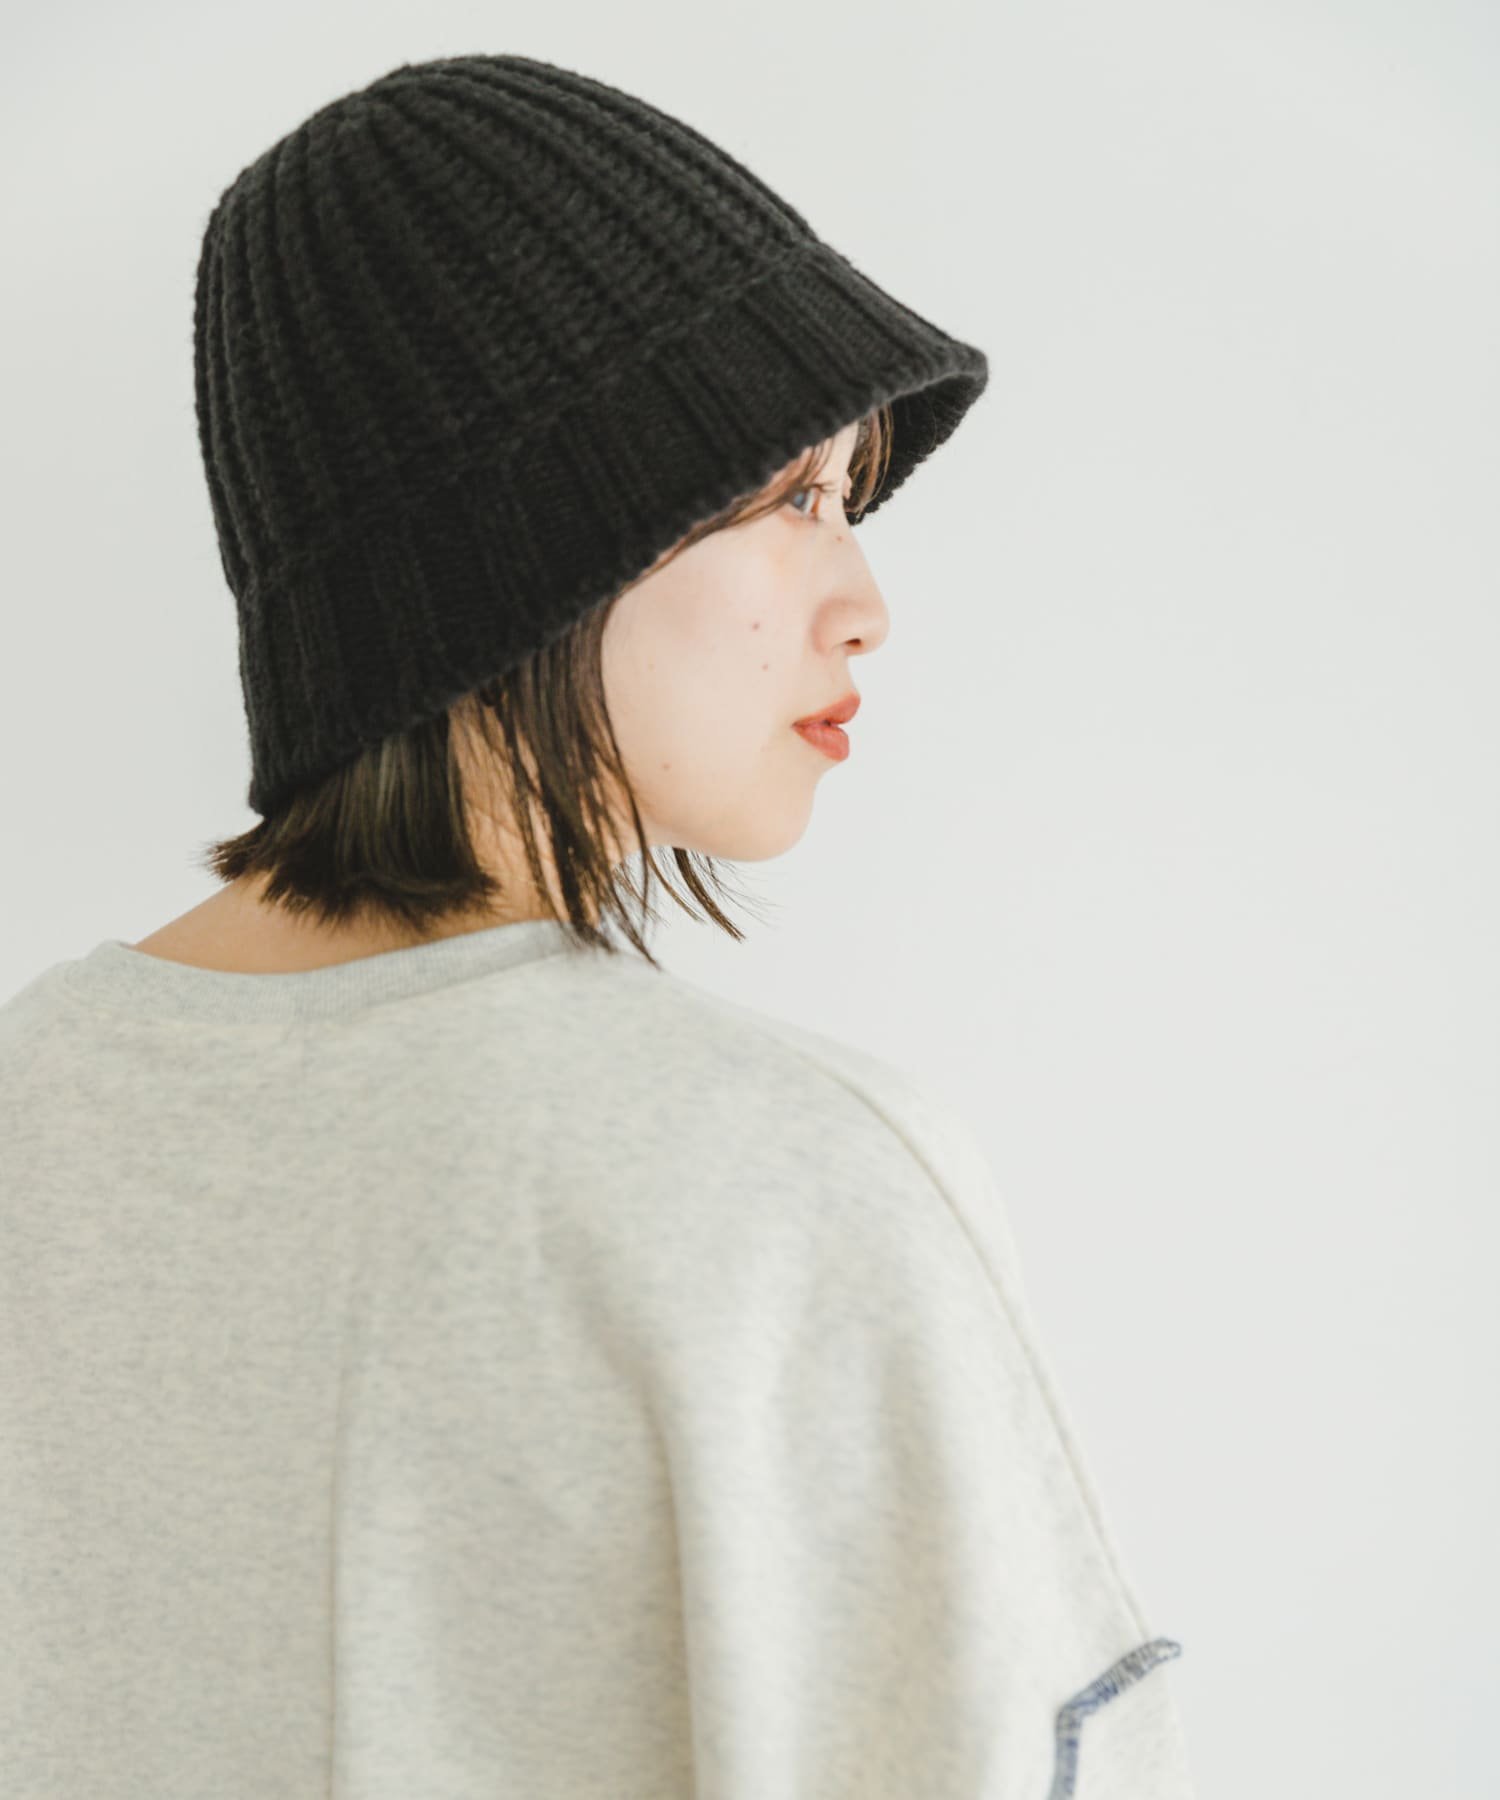 【SALE／50%OFF】URBAN RESEARCH ITEMS ニットバケットハット アーバンリサーチアイテムズ 帽子 ハット ブラック